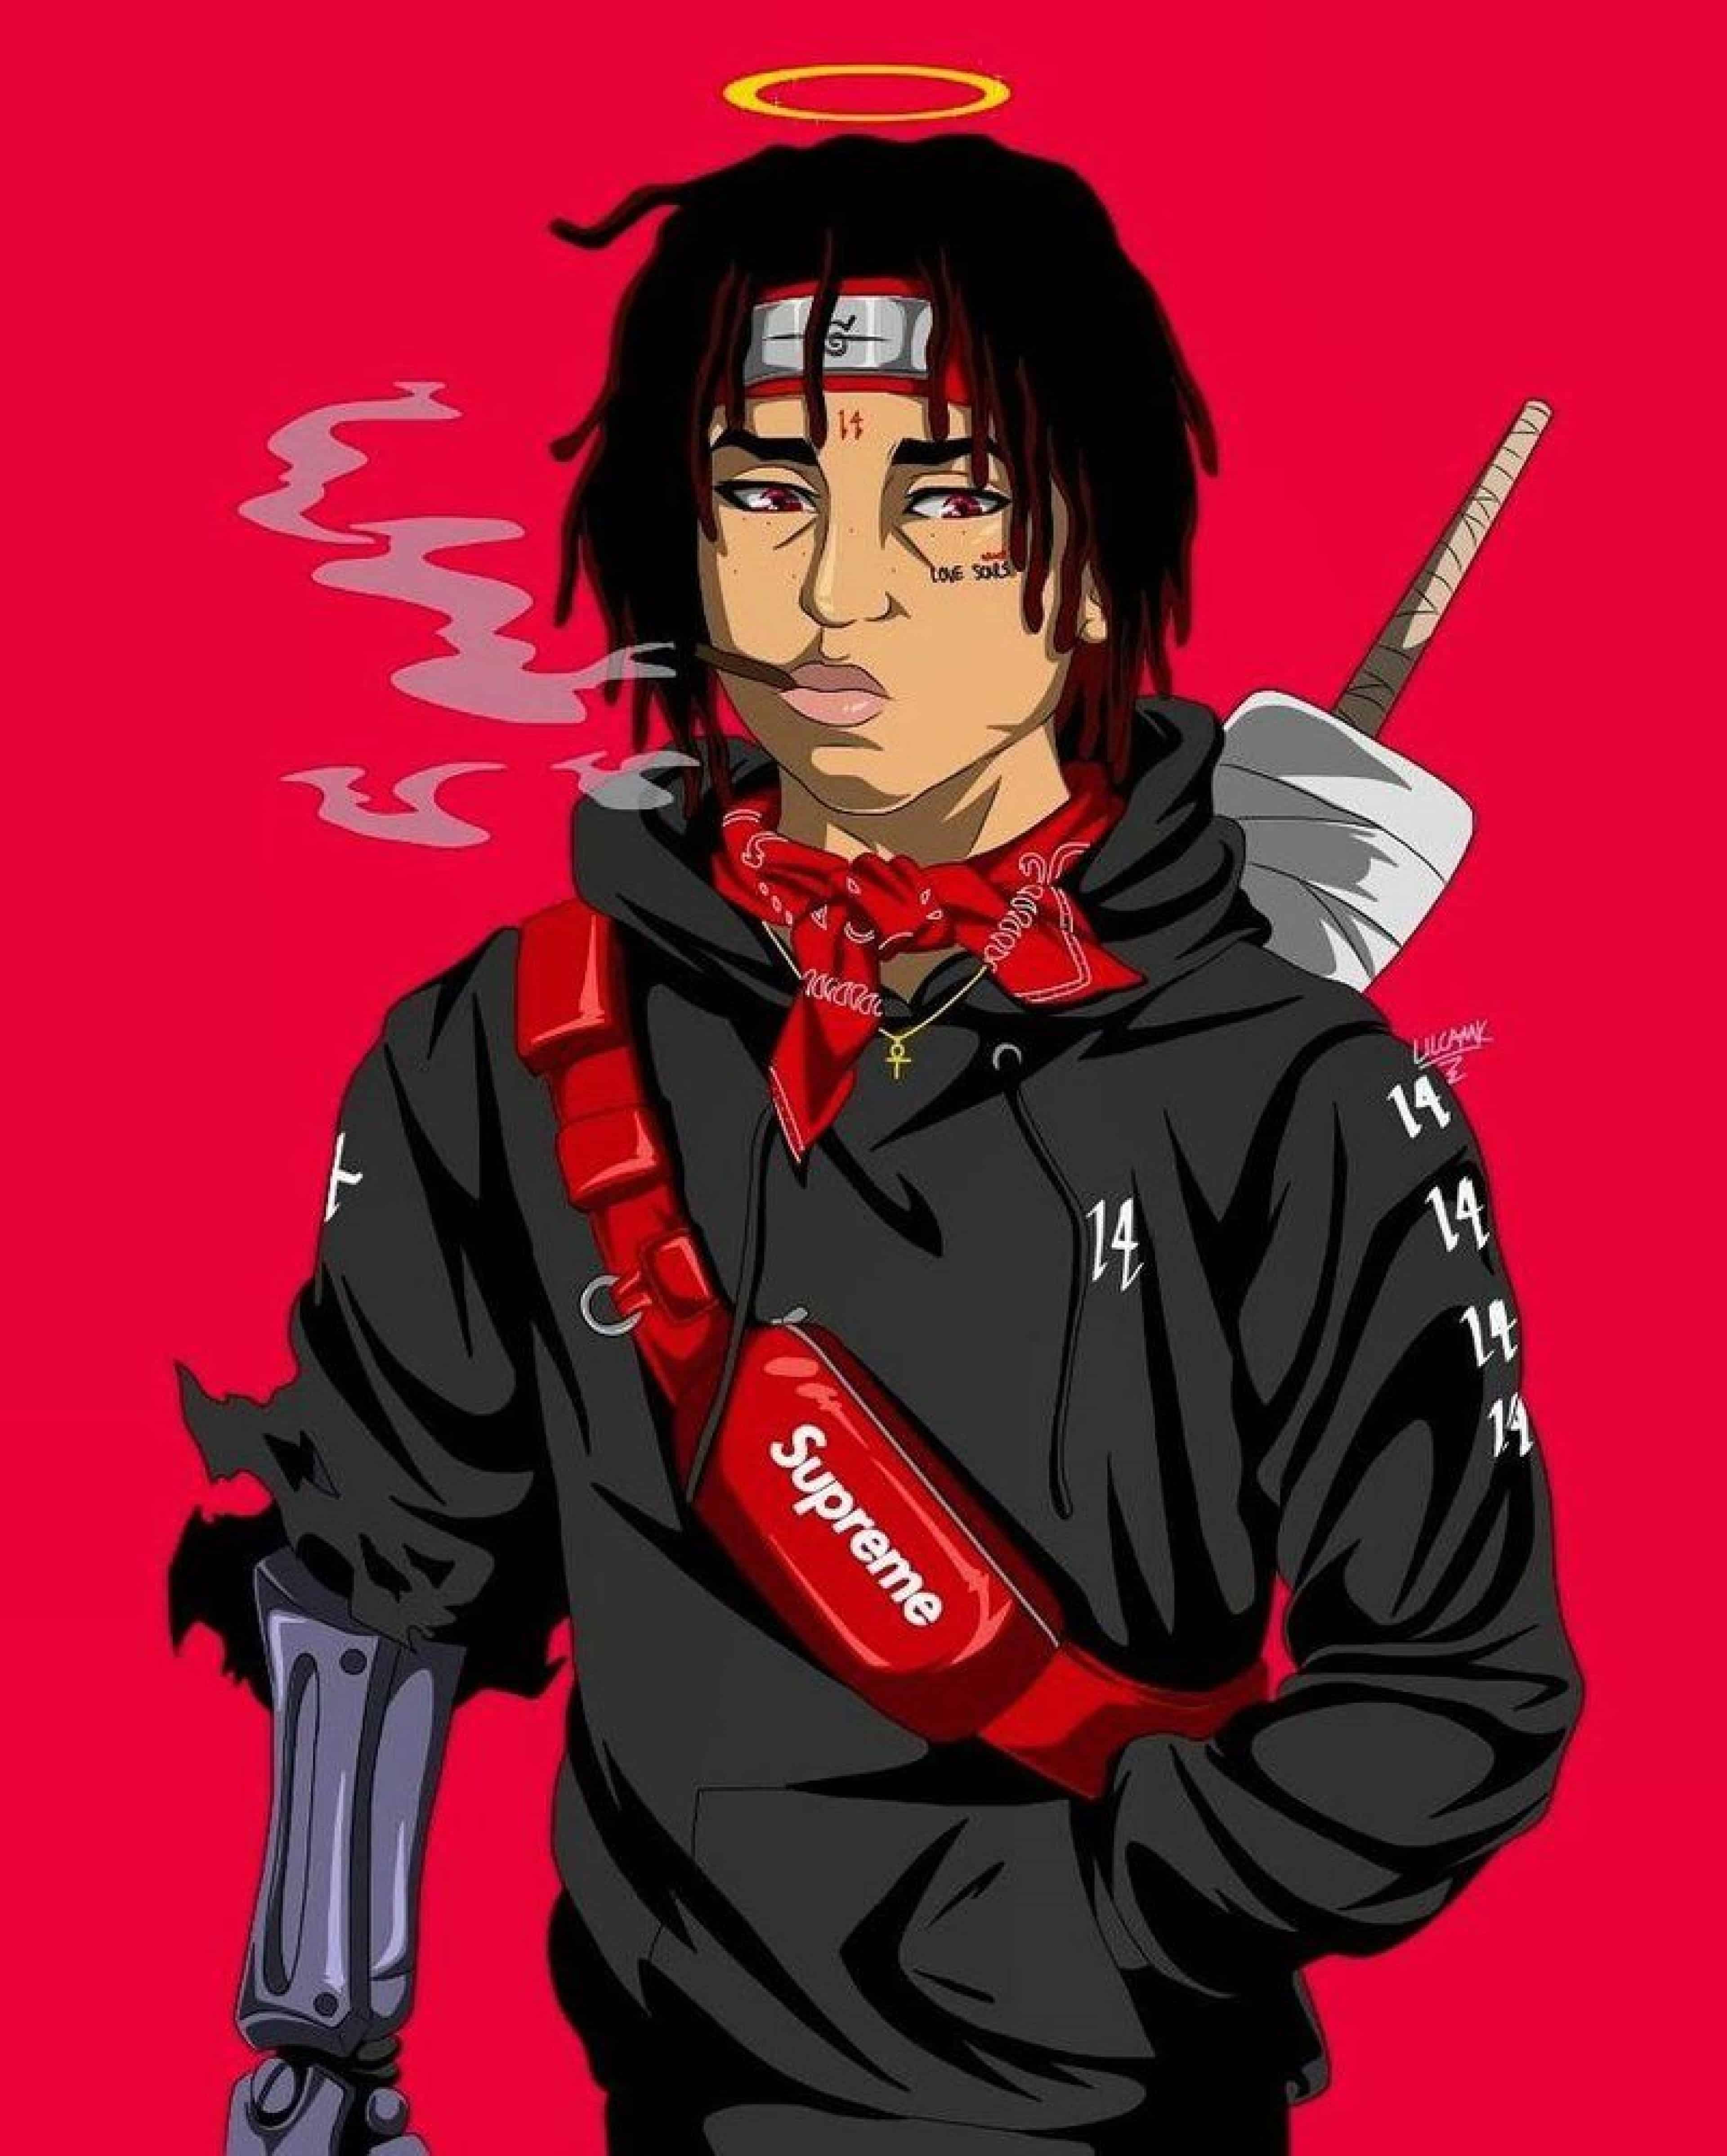 Anime Rapper Wallpapers  Top Free Anime Rapper  Anime rapper Anime  rappers wallpaper Anime